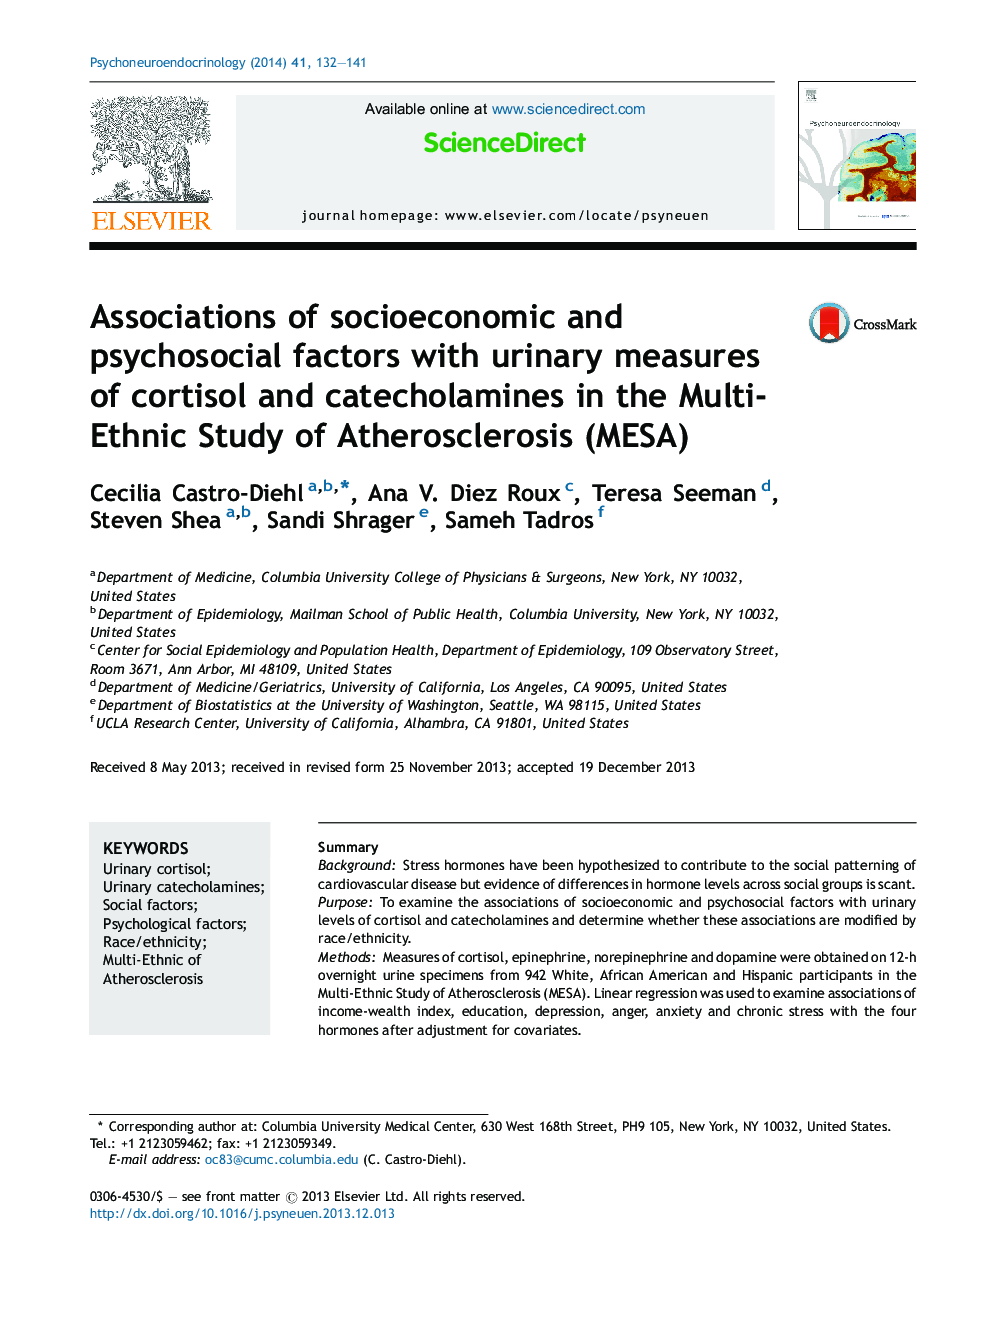 Associations of socioeconomic and psychosocial factors with urinary measures of cortisol and catecholamines in the Multi-Ethnic Study of Atherosclerosis (MESA)